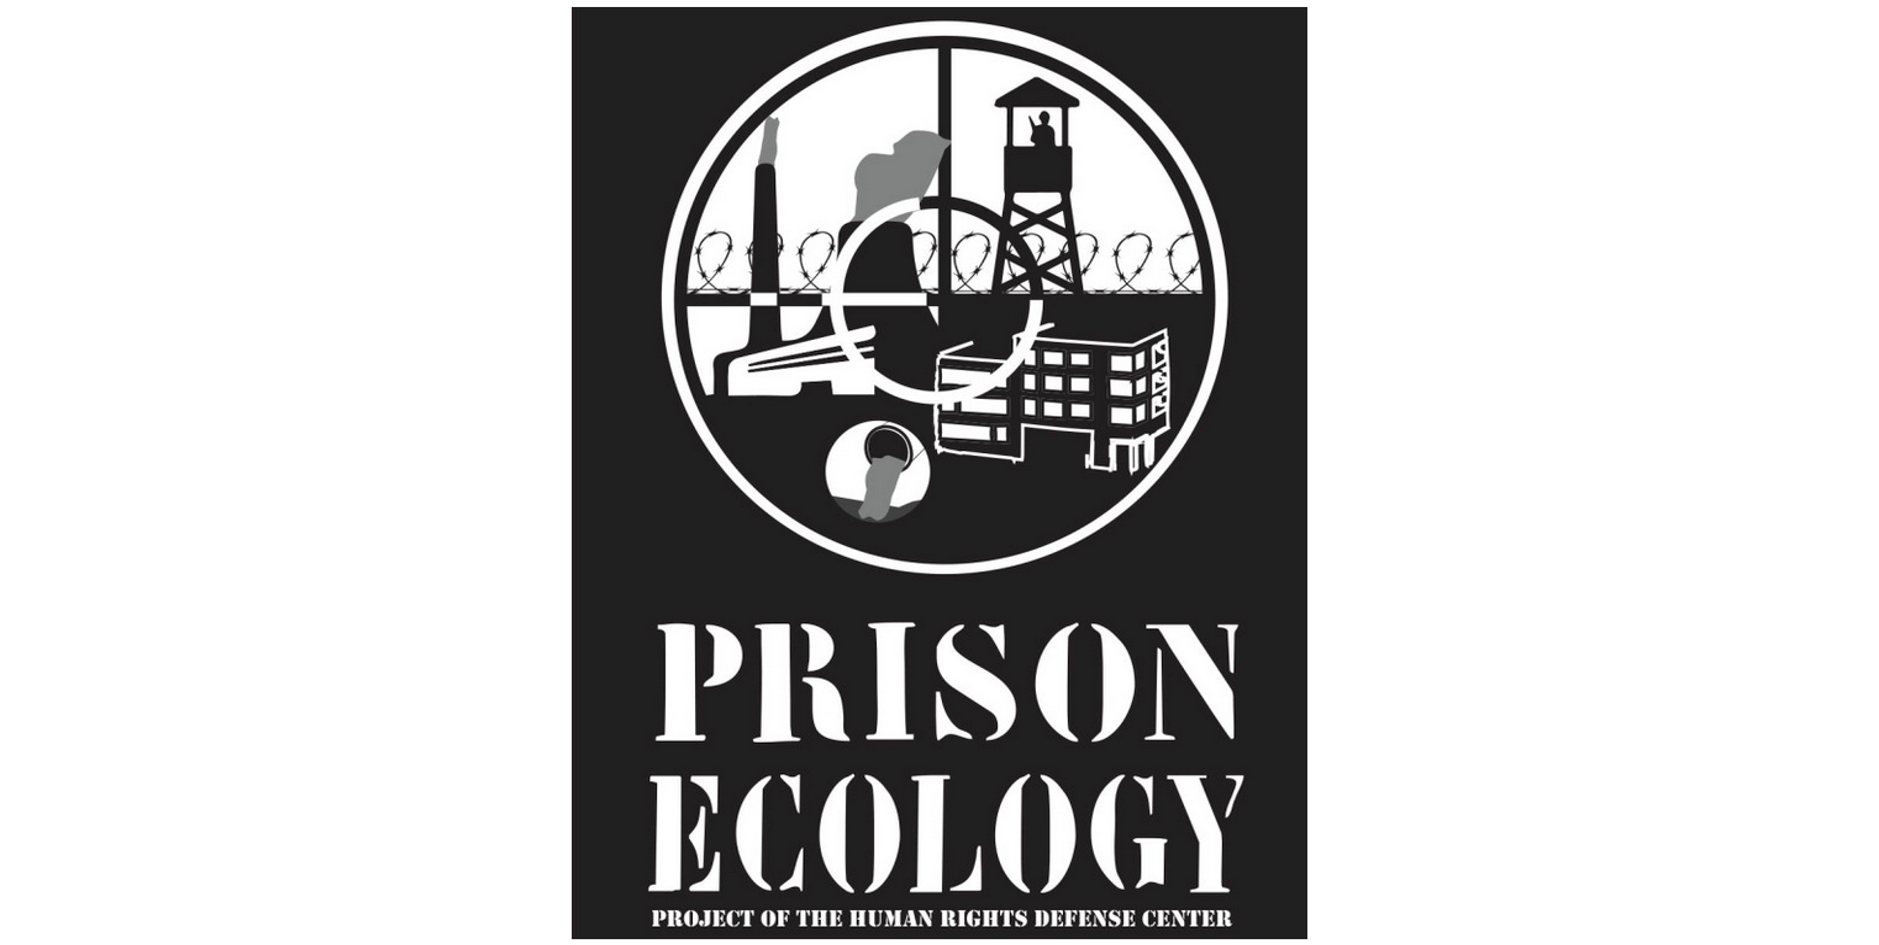 "Prison Ecology: Project of the Human Rights Center" program logo